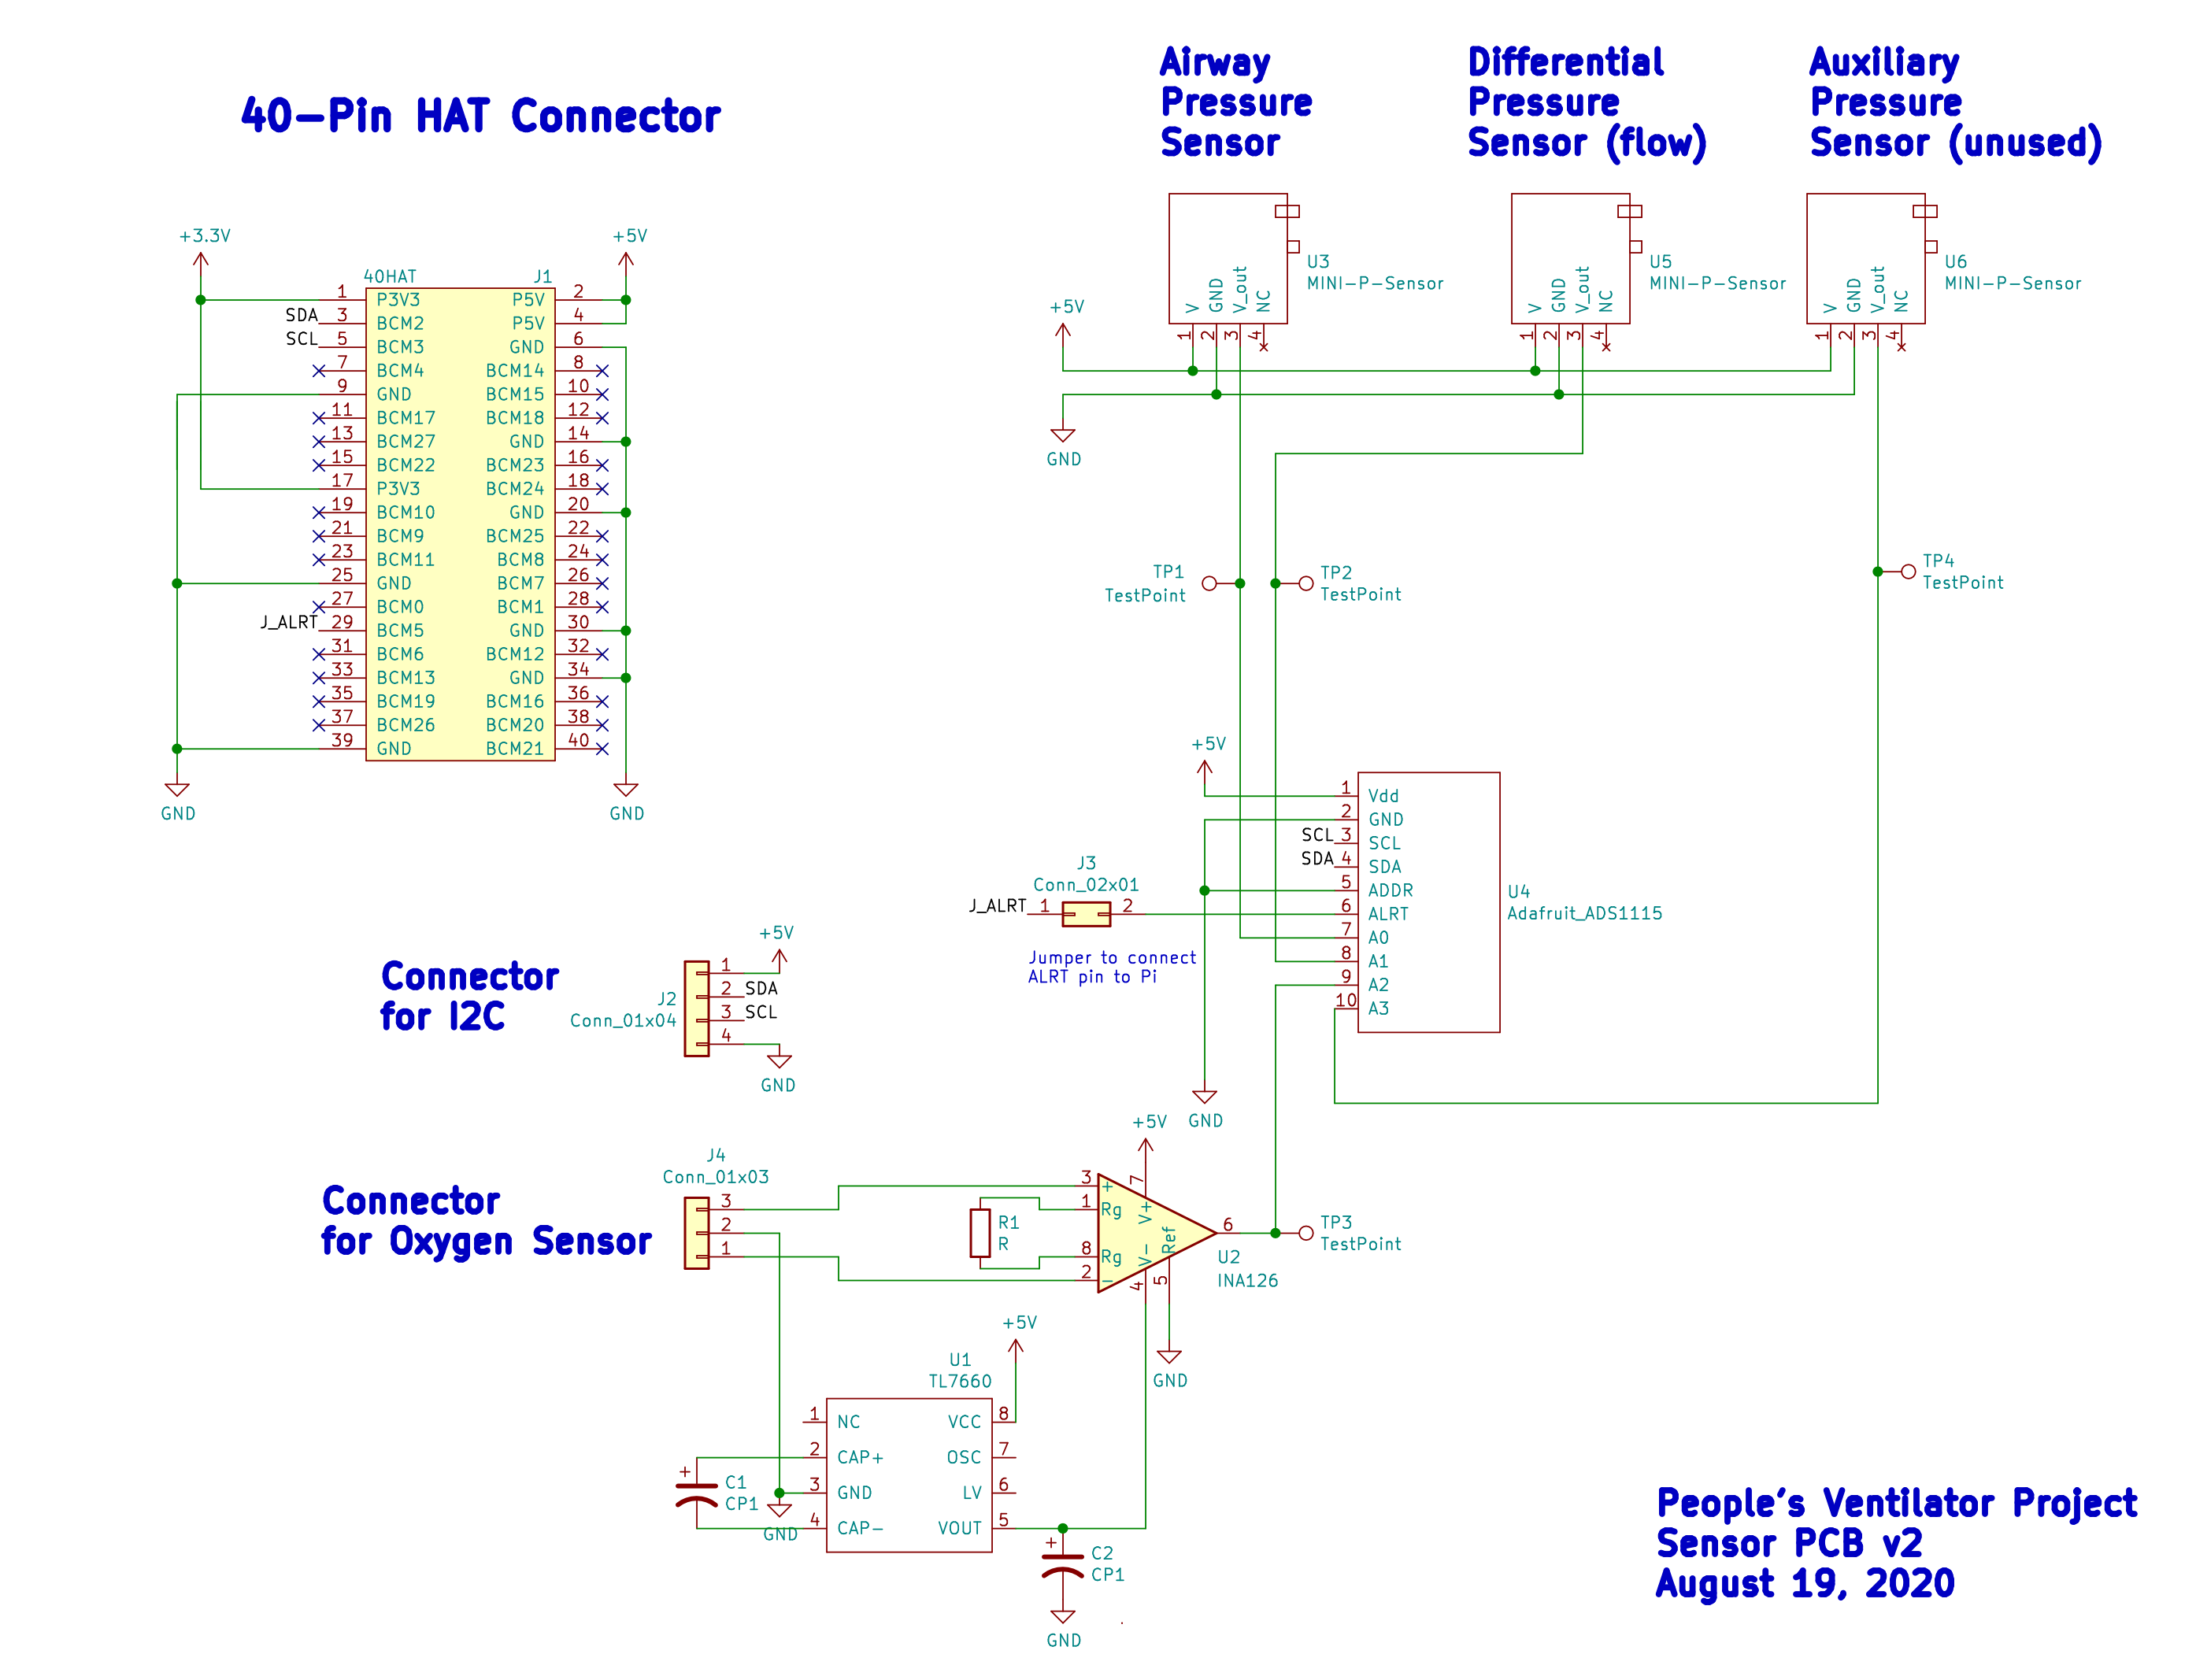 images/pressure_rev2_schematic_image.png